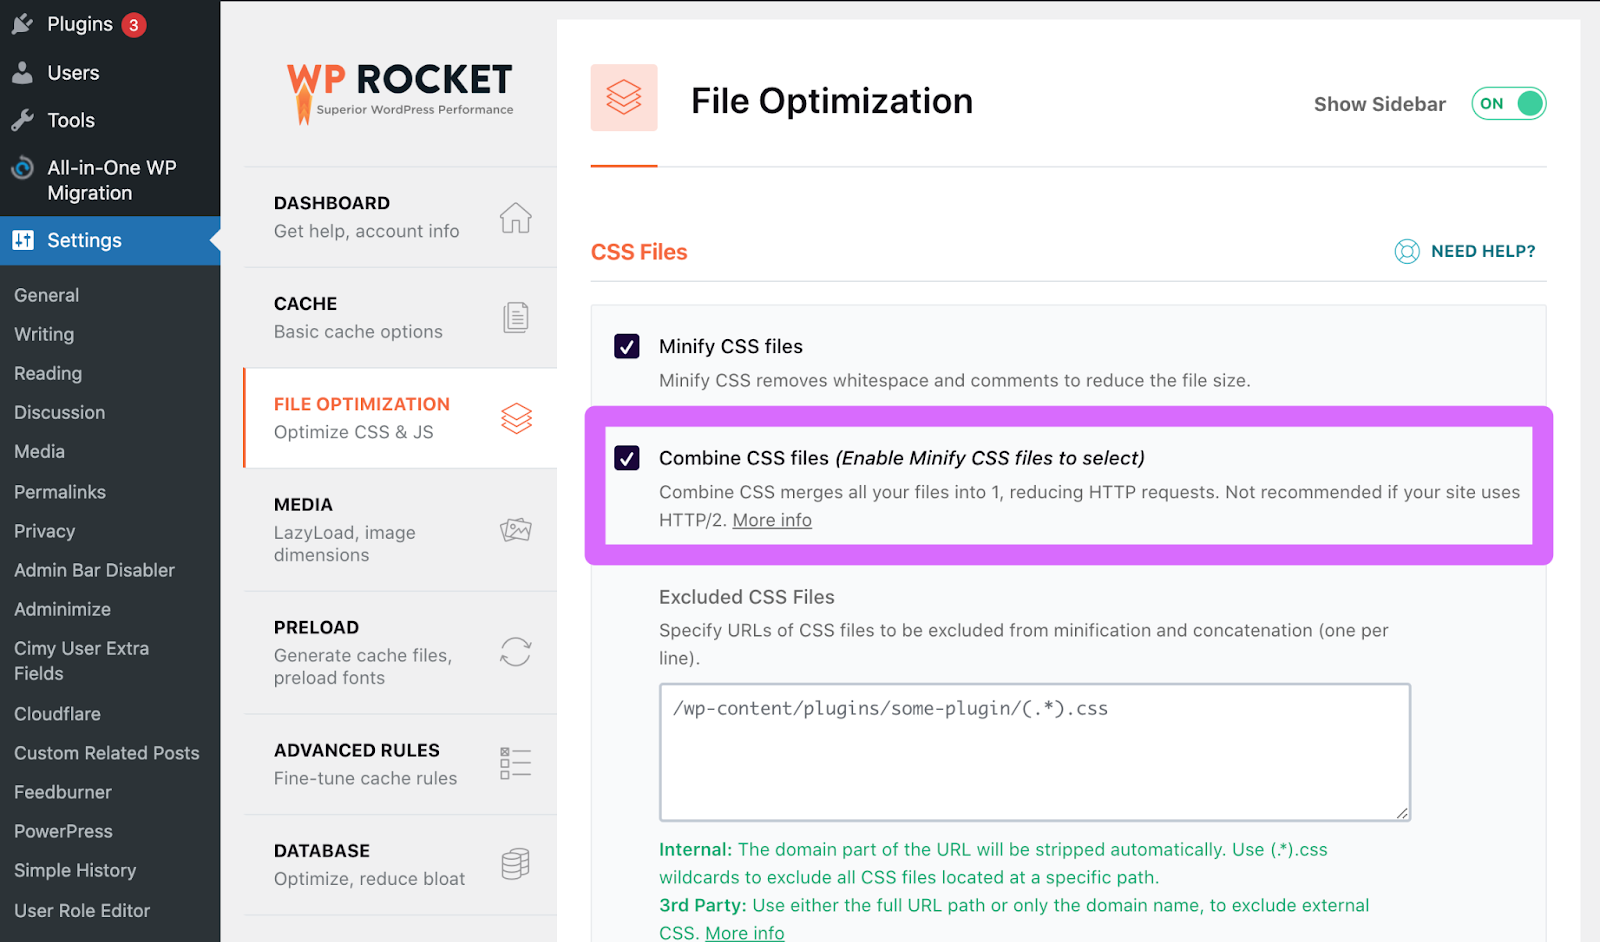 wp rocket combining css files in their settings page